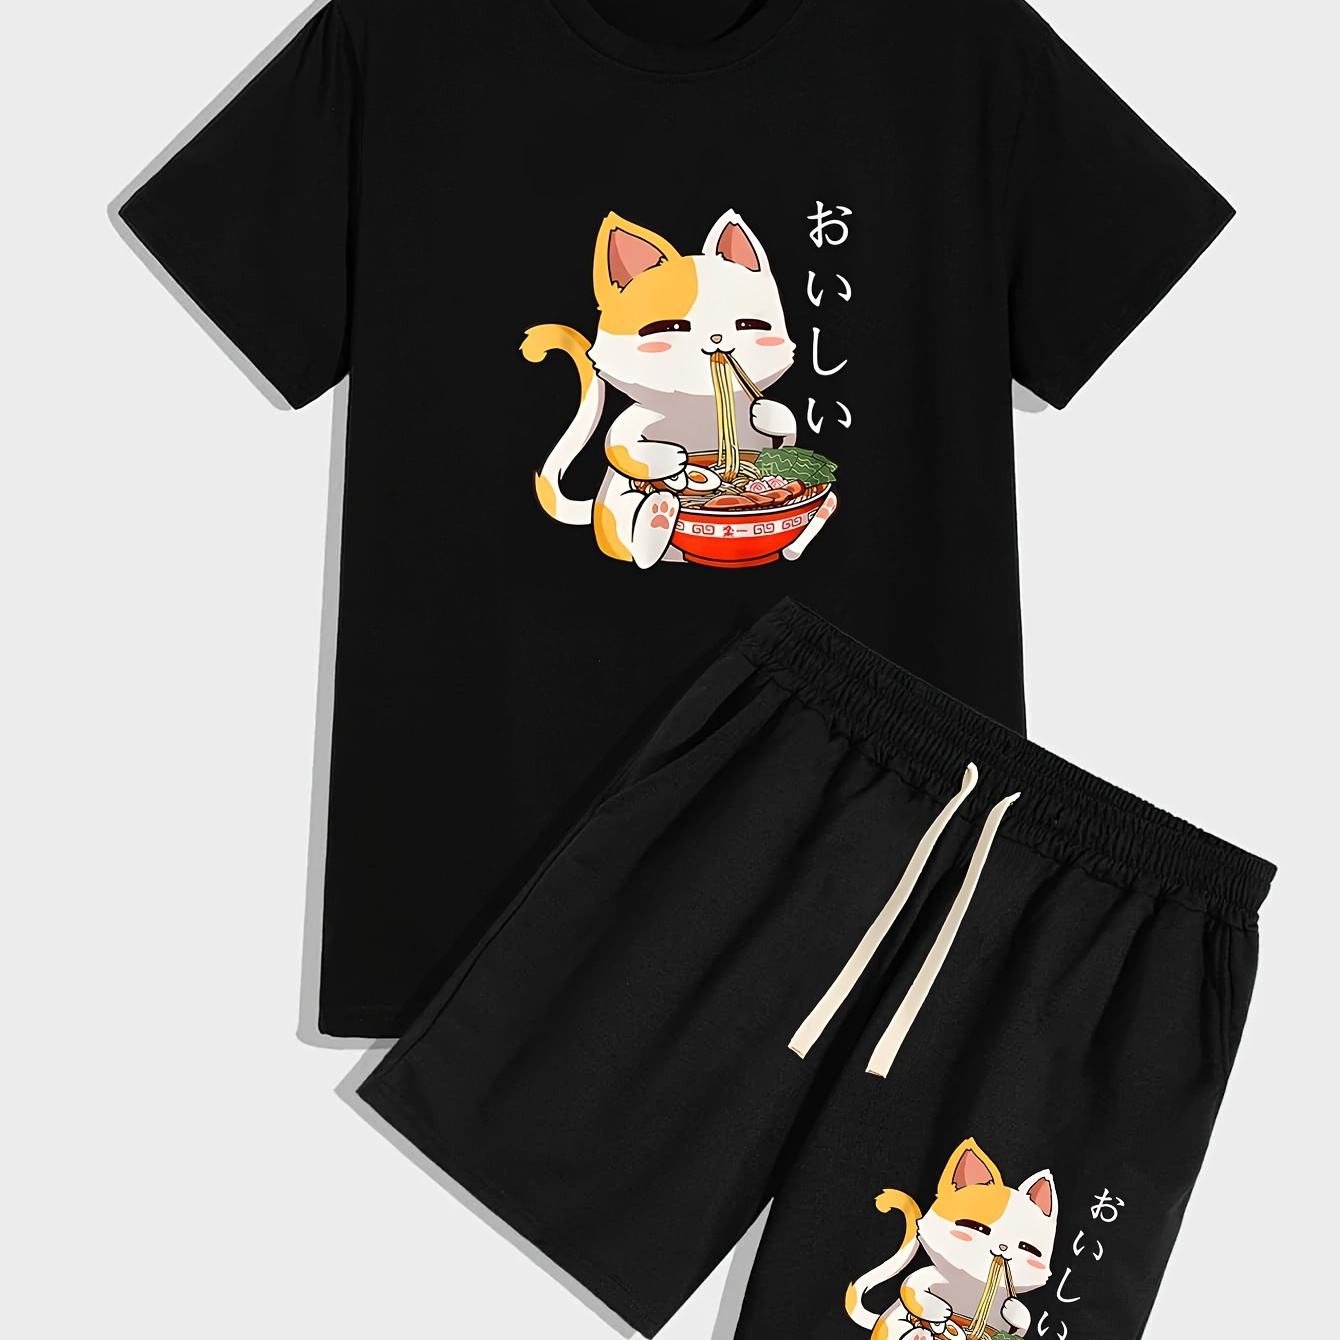 

The Cute Cat Is Eating Noodles Happily Print Men's 2pcs Short Sleeve Shorts Set Casual Sports Regular Top Drawstring Pants Suit Outfits For Spring Summer Holiday Leisure Vacation Outdoor Fitness